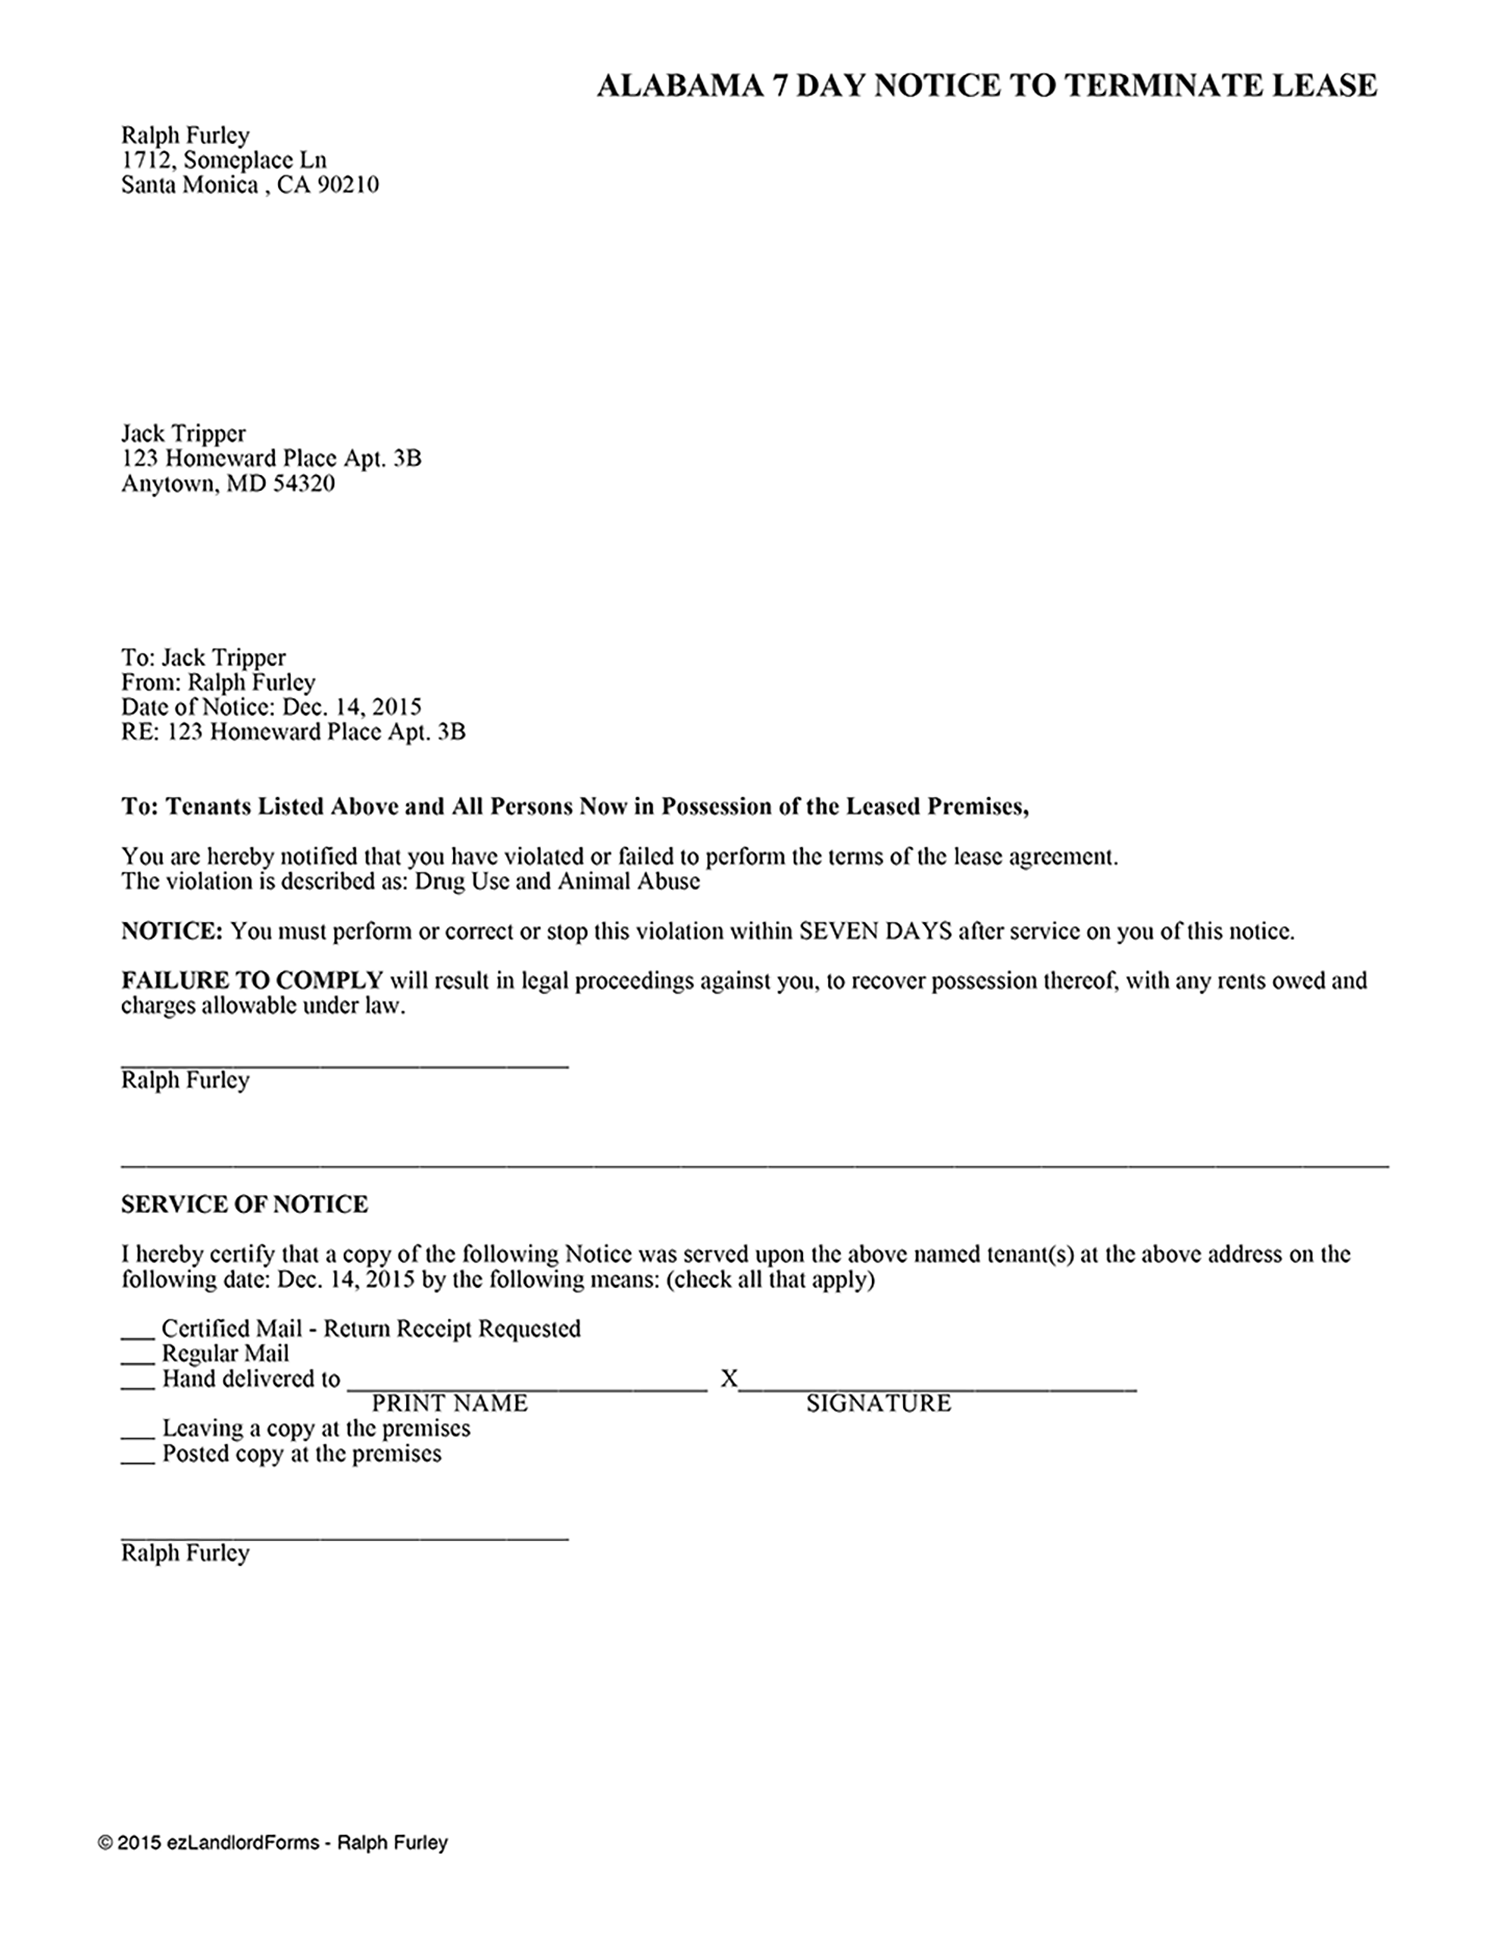 Landlord Terminate Lease Letter from www.ezlandlordforms.com